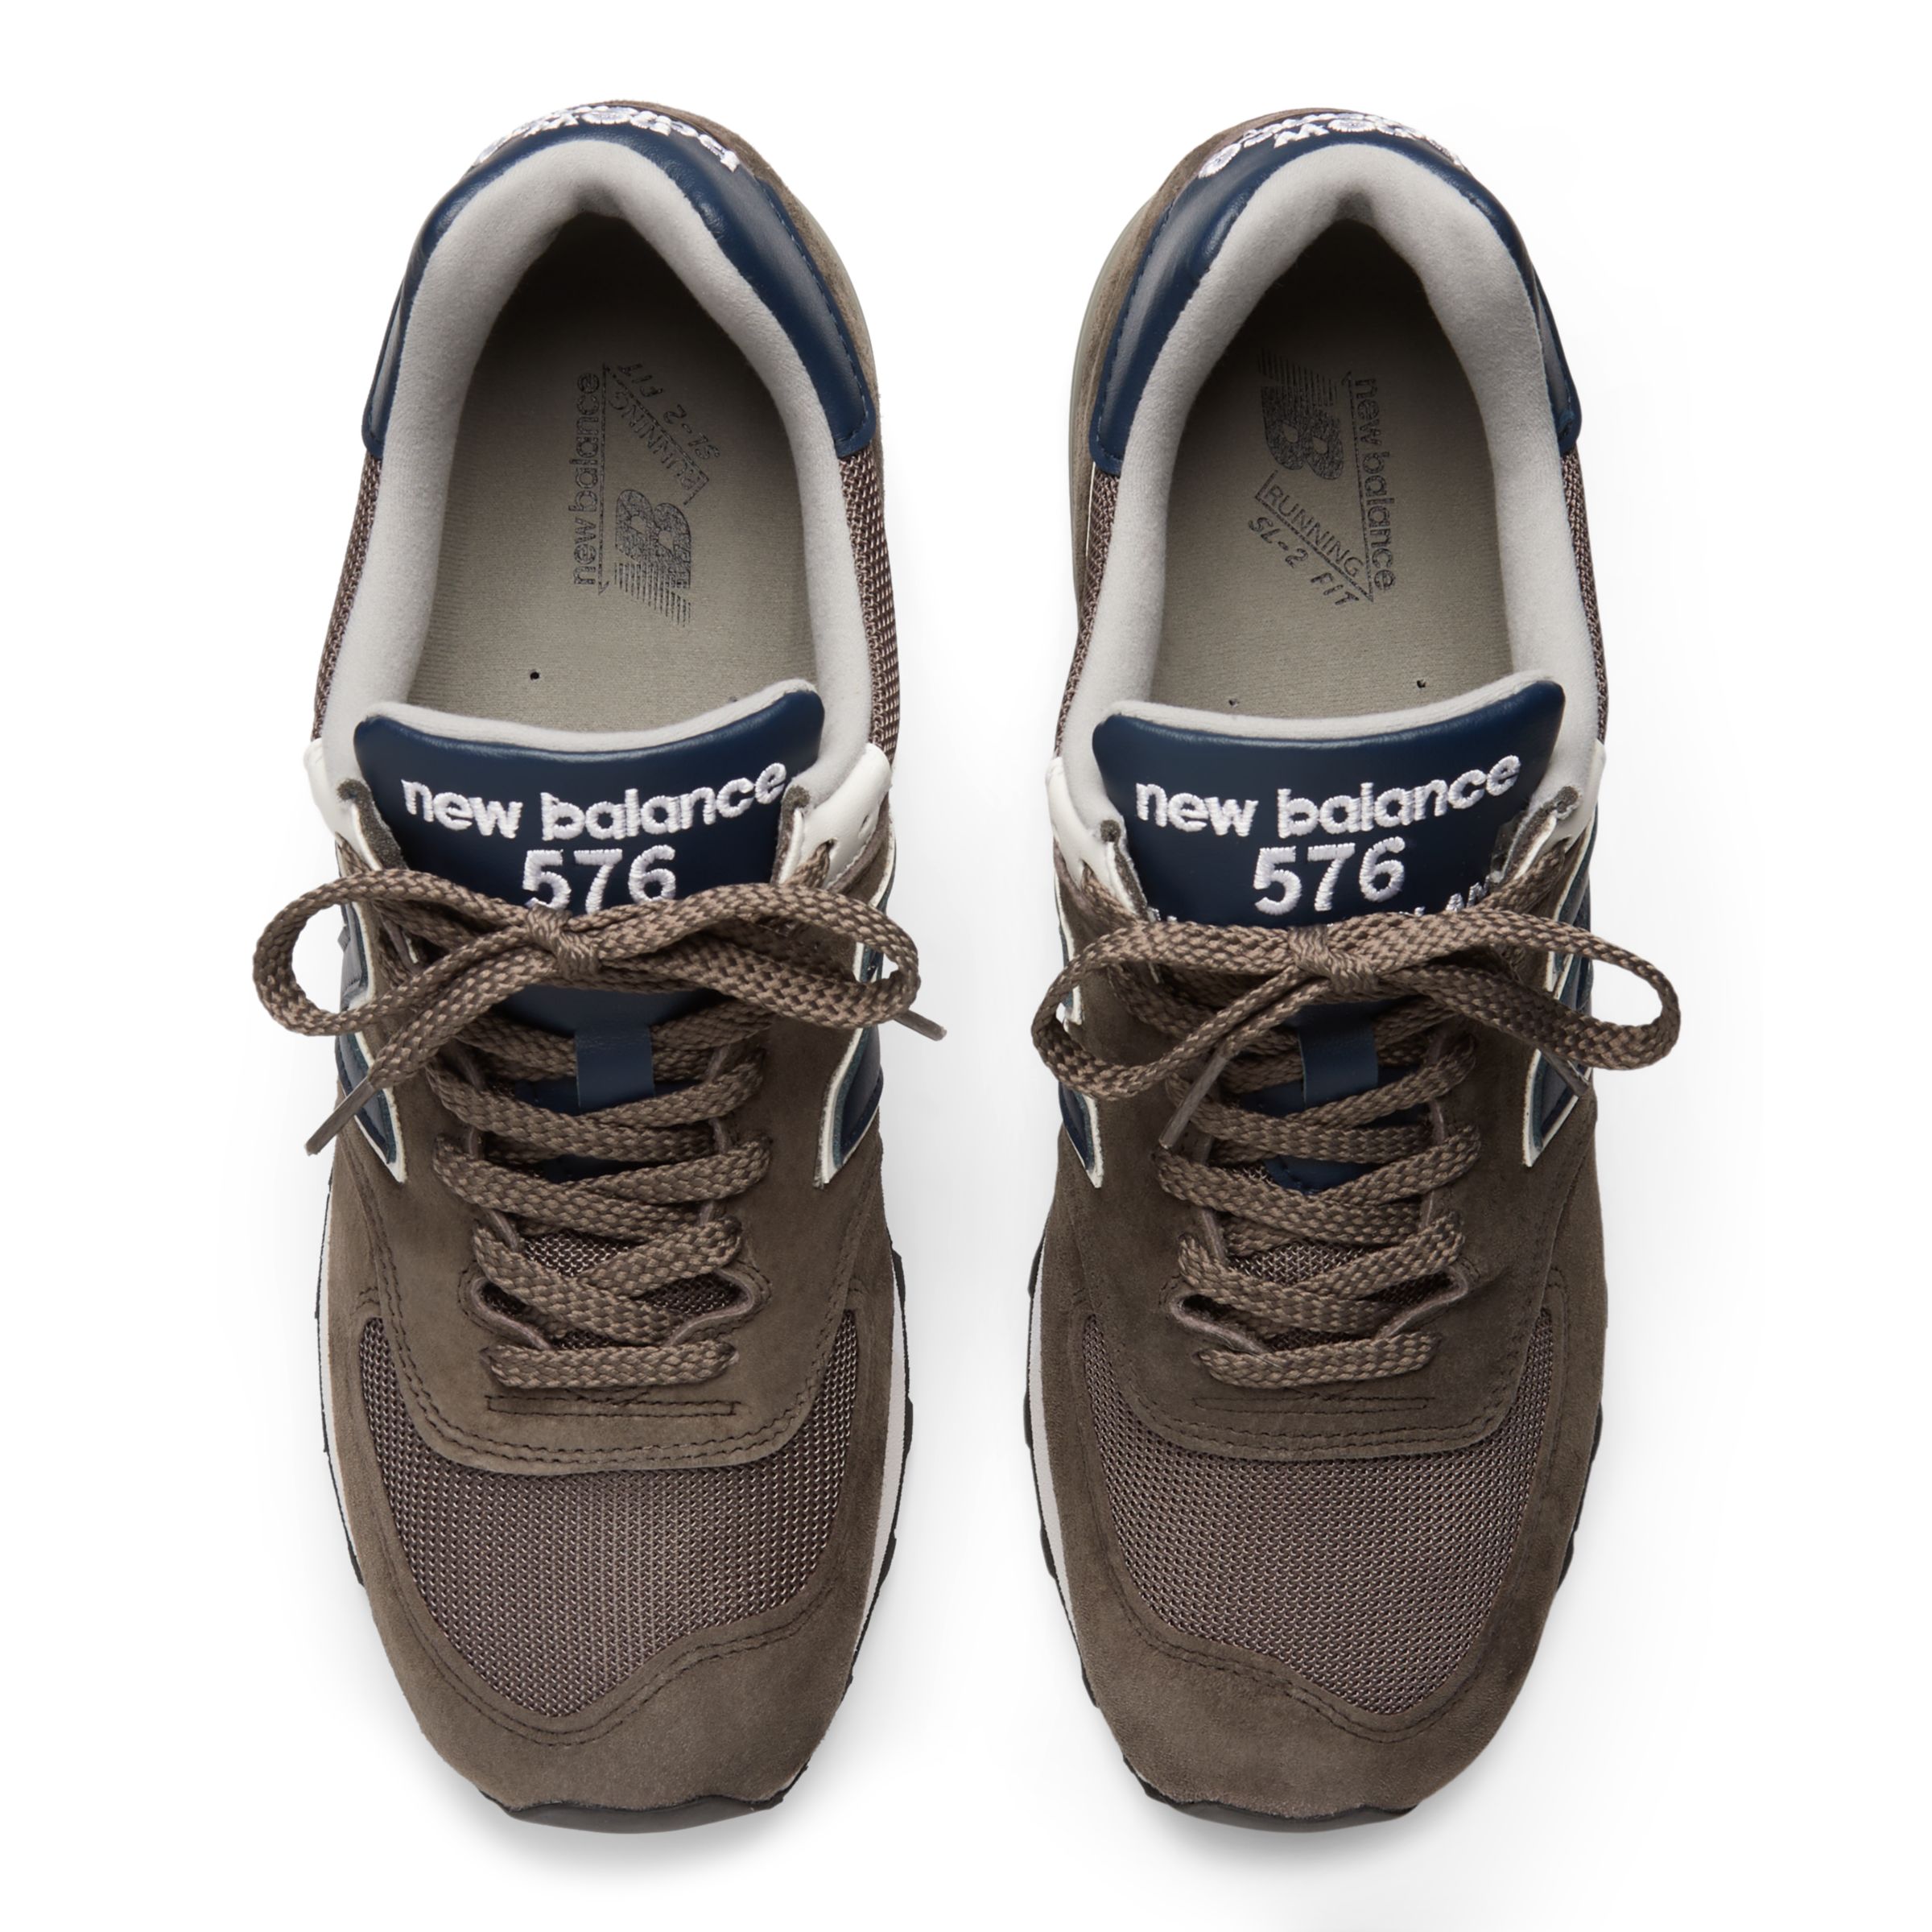 New Balance 576 Made in UK - Size 7 - Brown